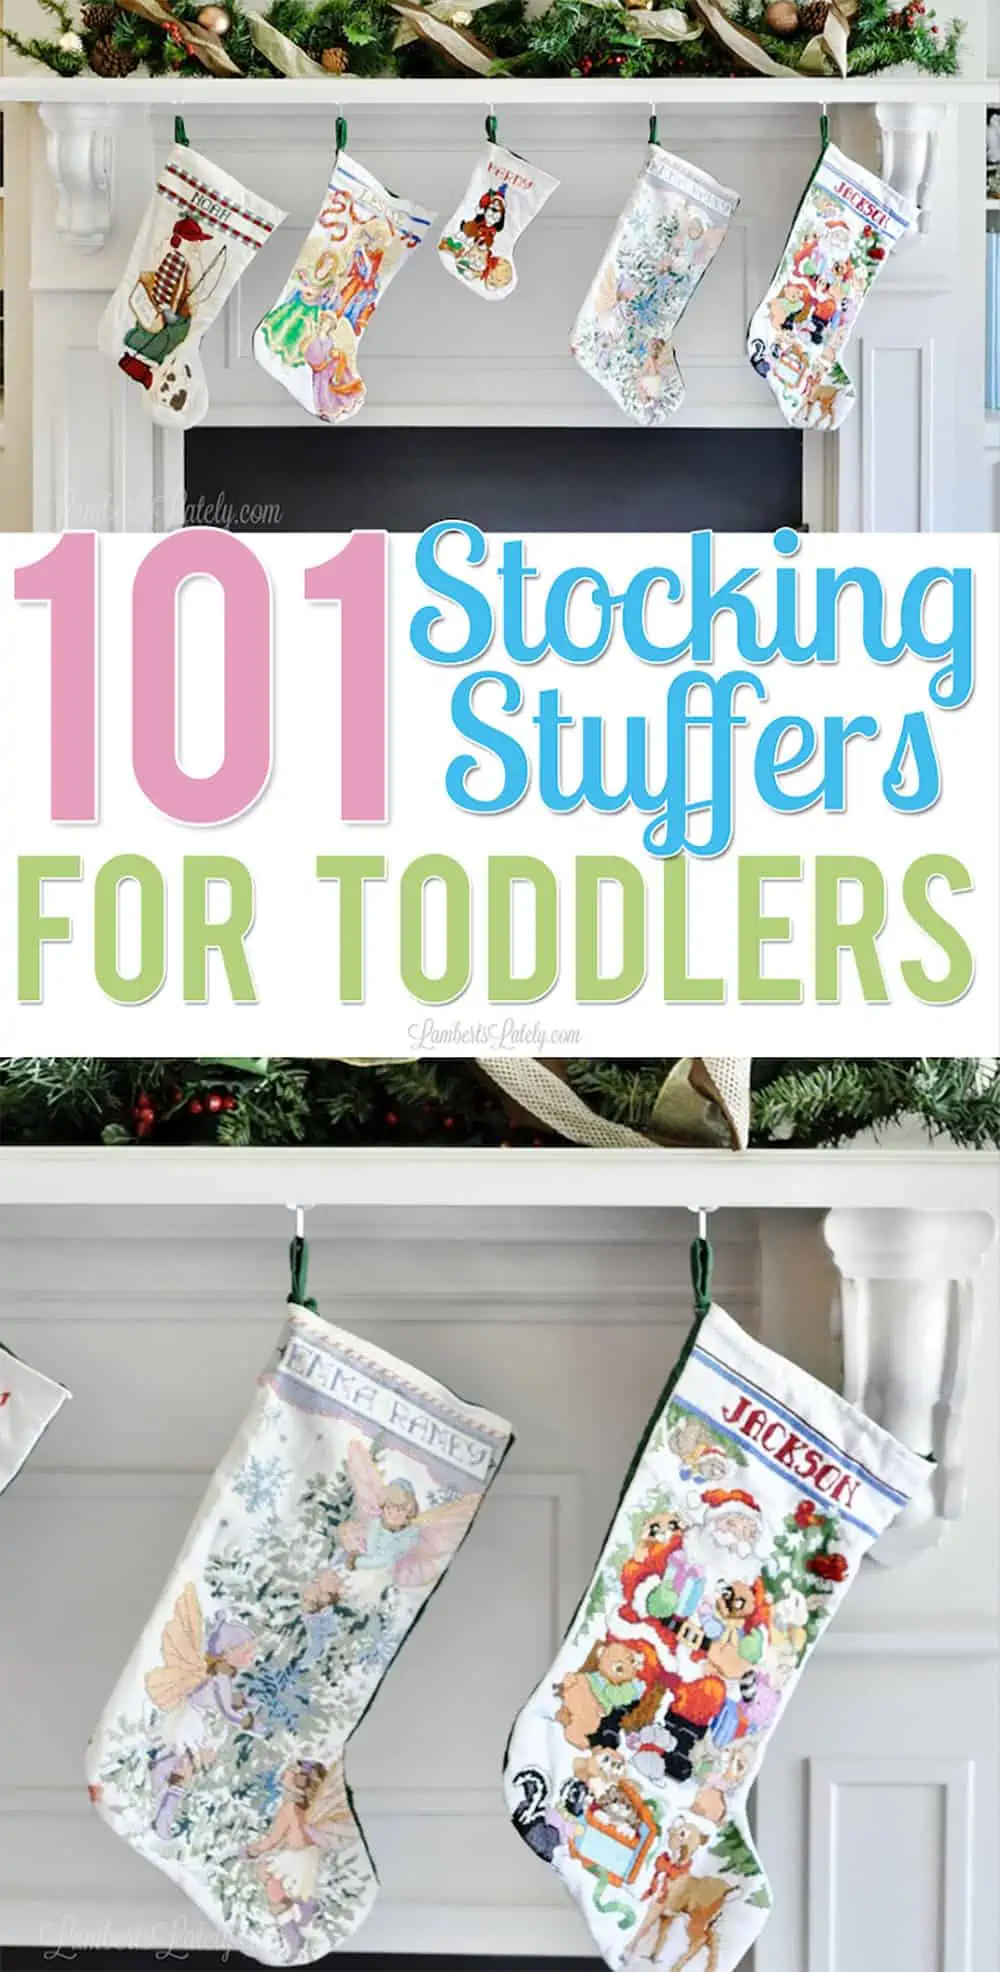 101 stocking stuffers for toddlers.